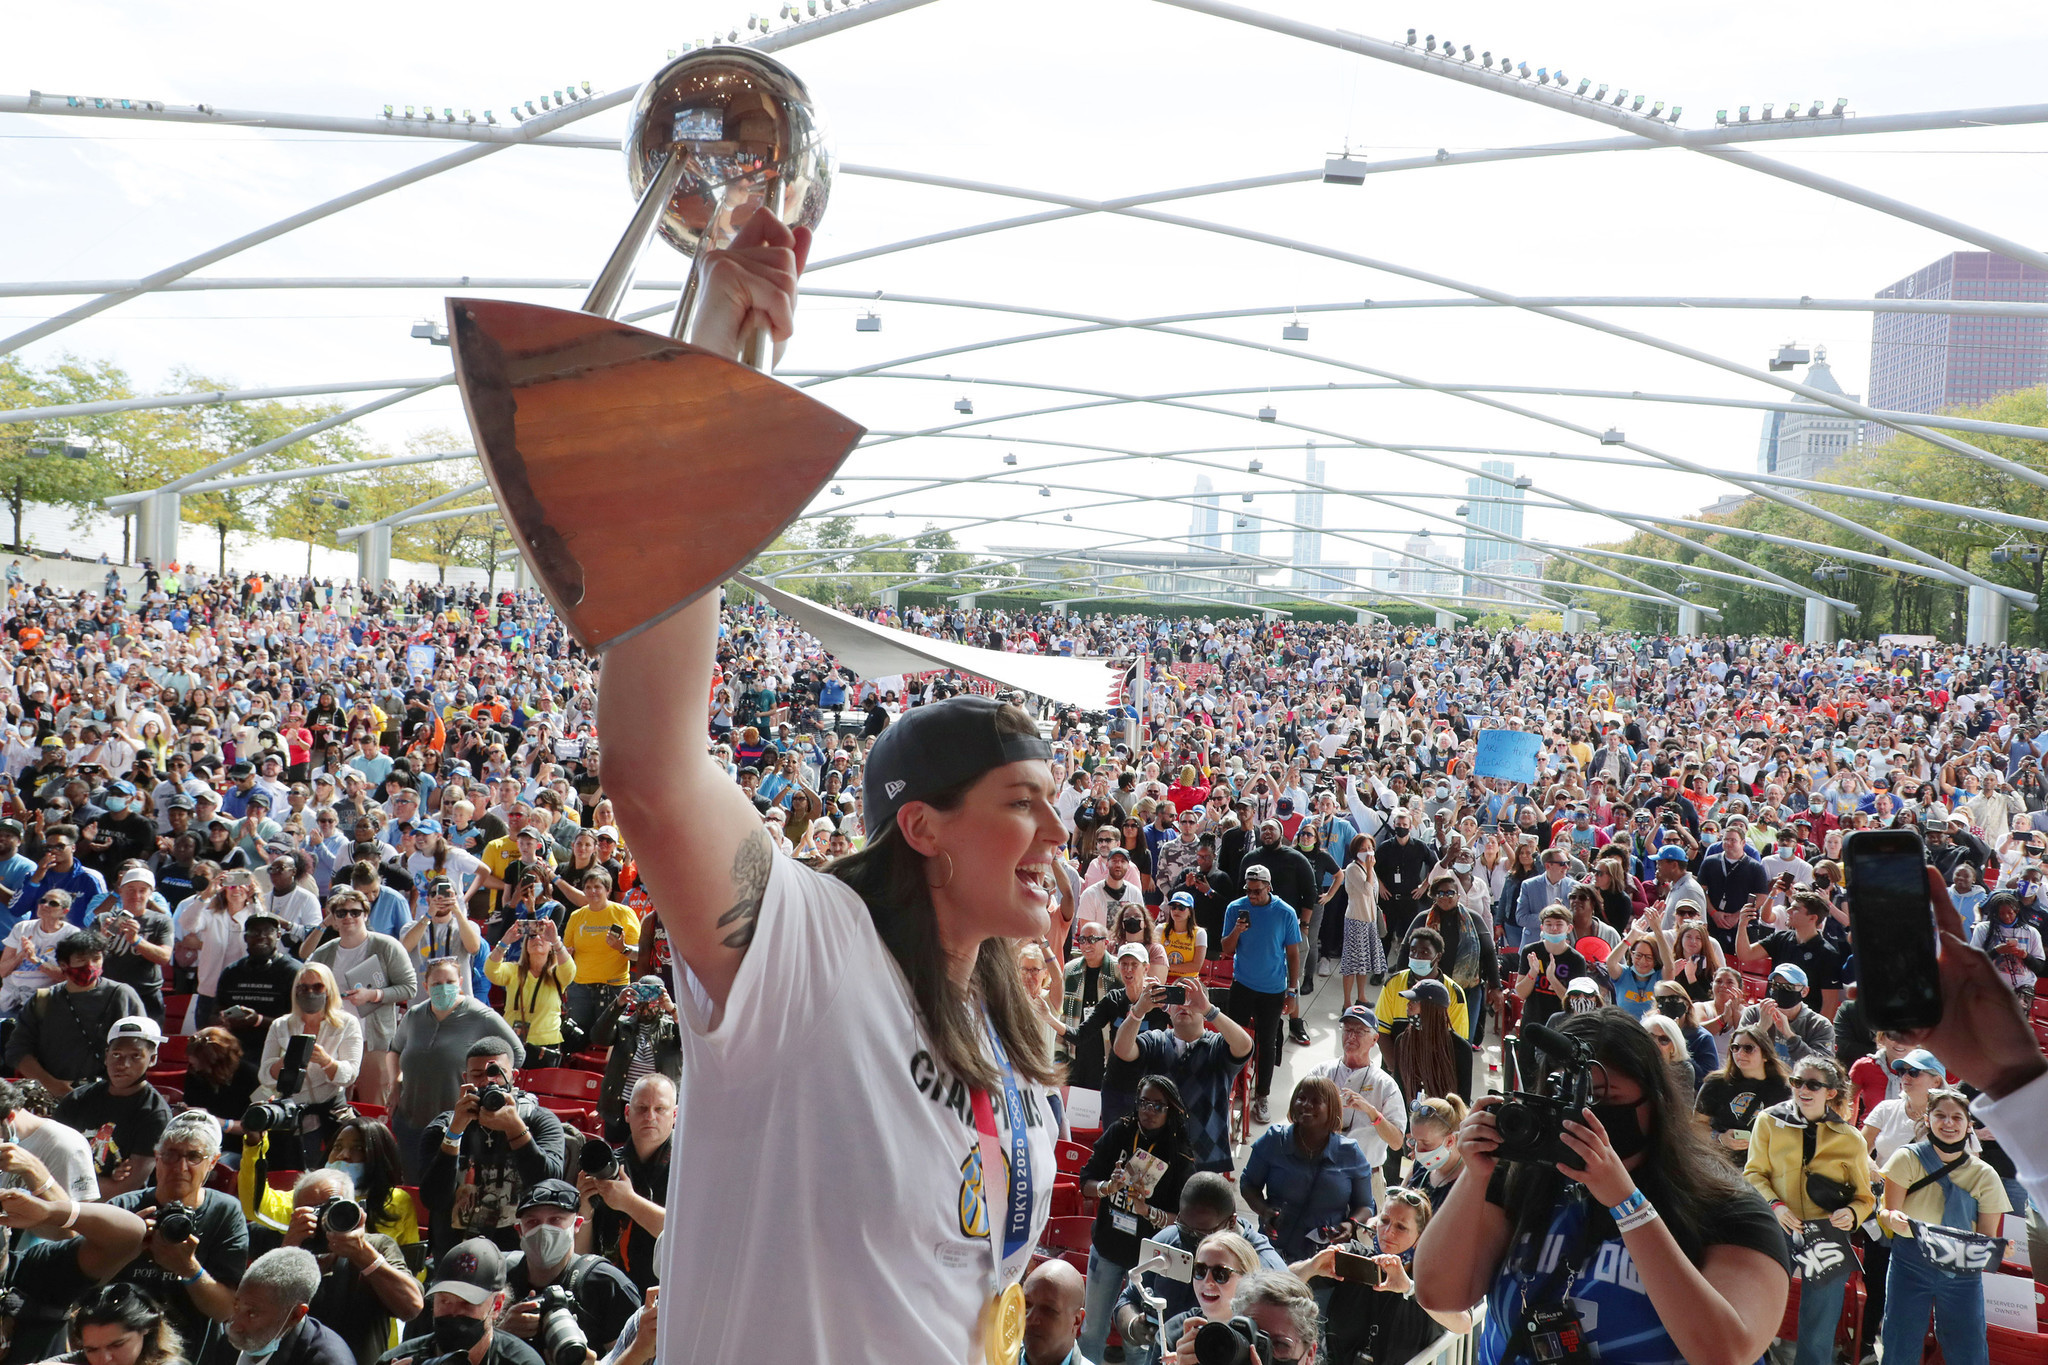 Candace Parker, Chicago Sky are Crowned 2021 WNBA Champions